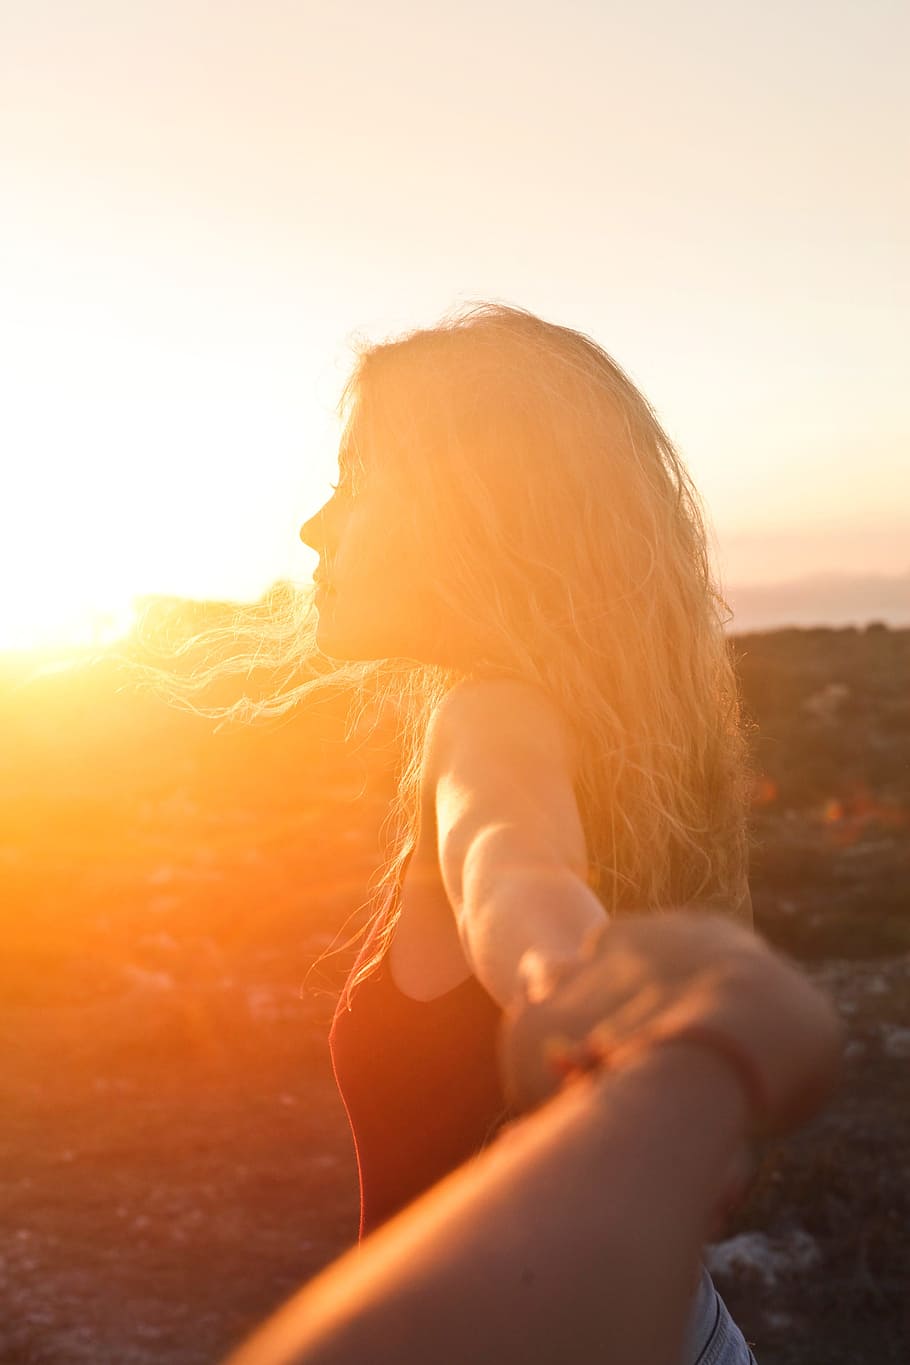 A young blonde woman looking at the sunset with her hand held by another hand